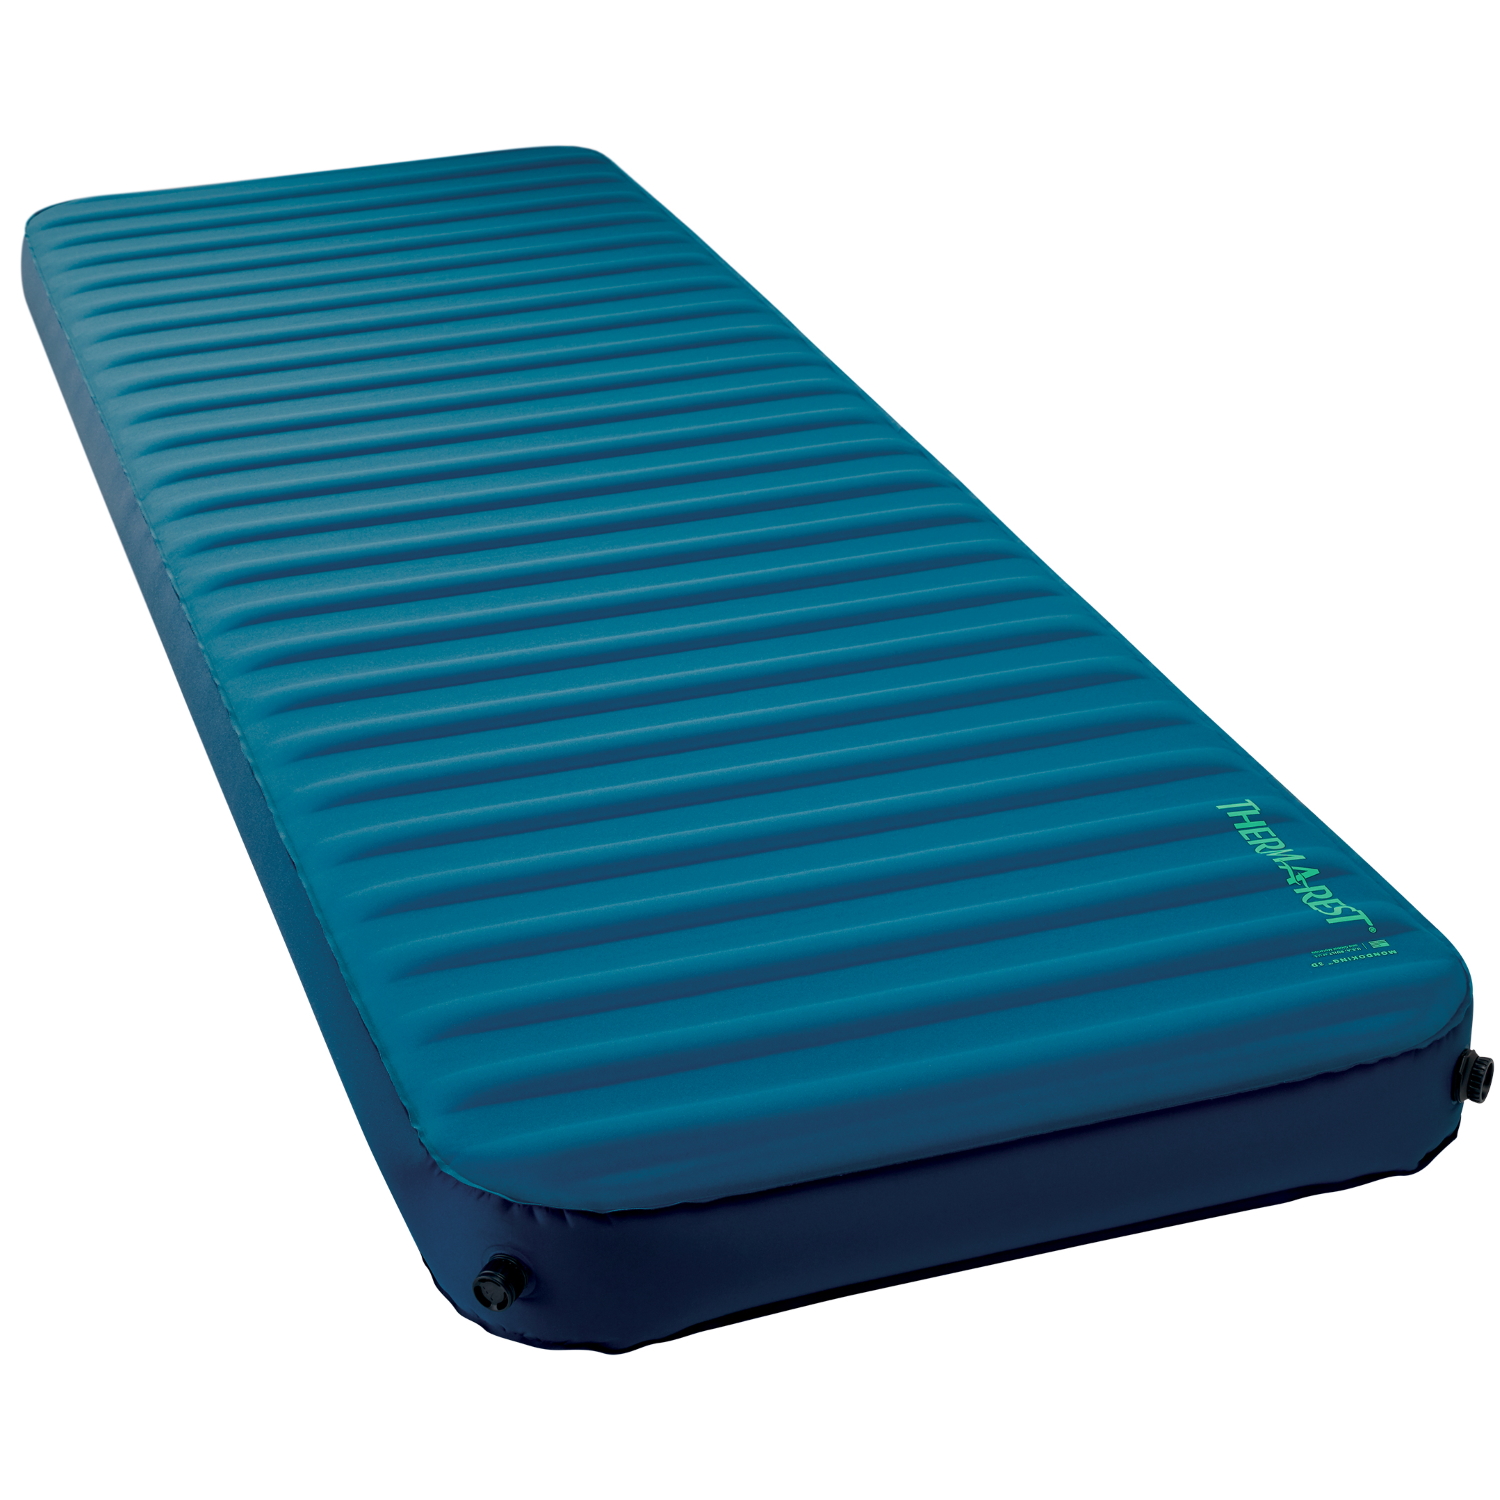 Picture of Therm-a-Rest MondoKing 3D - Mattress Sleeping Pad - Large - Marine Blue